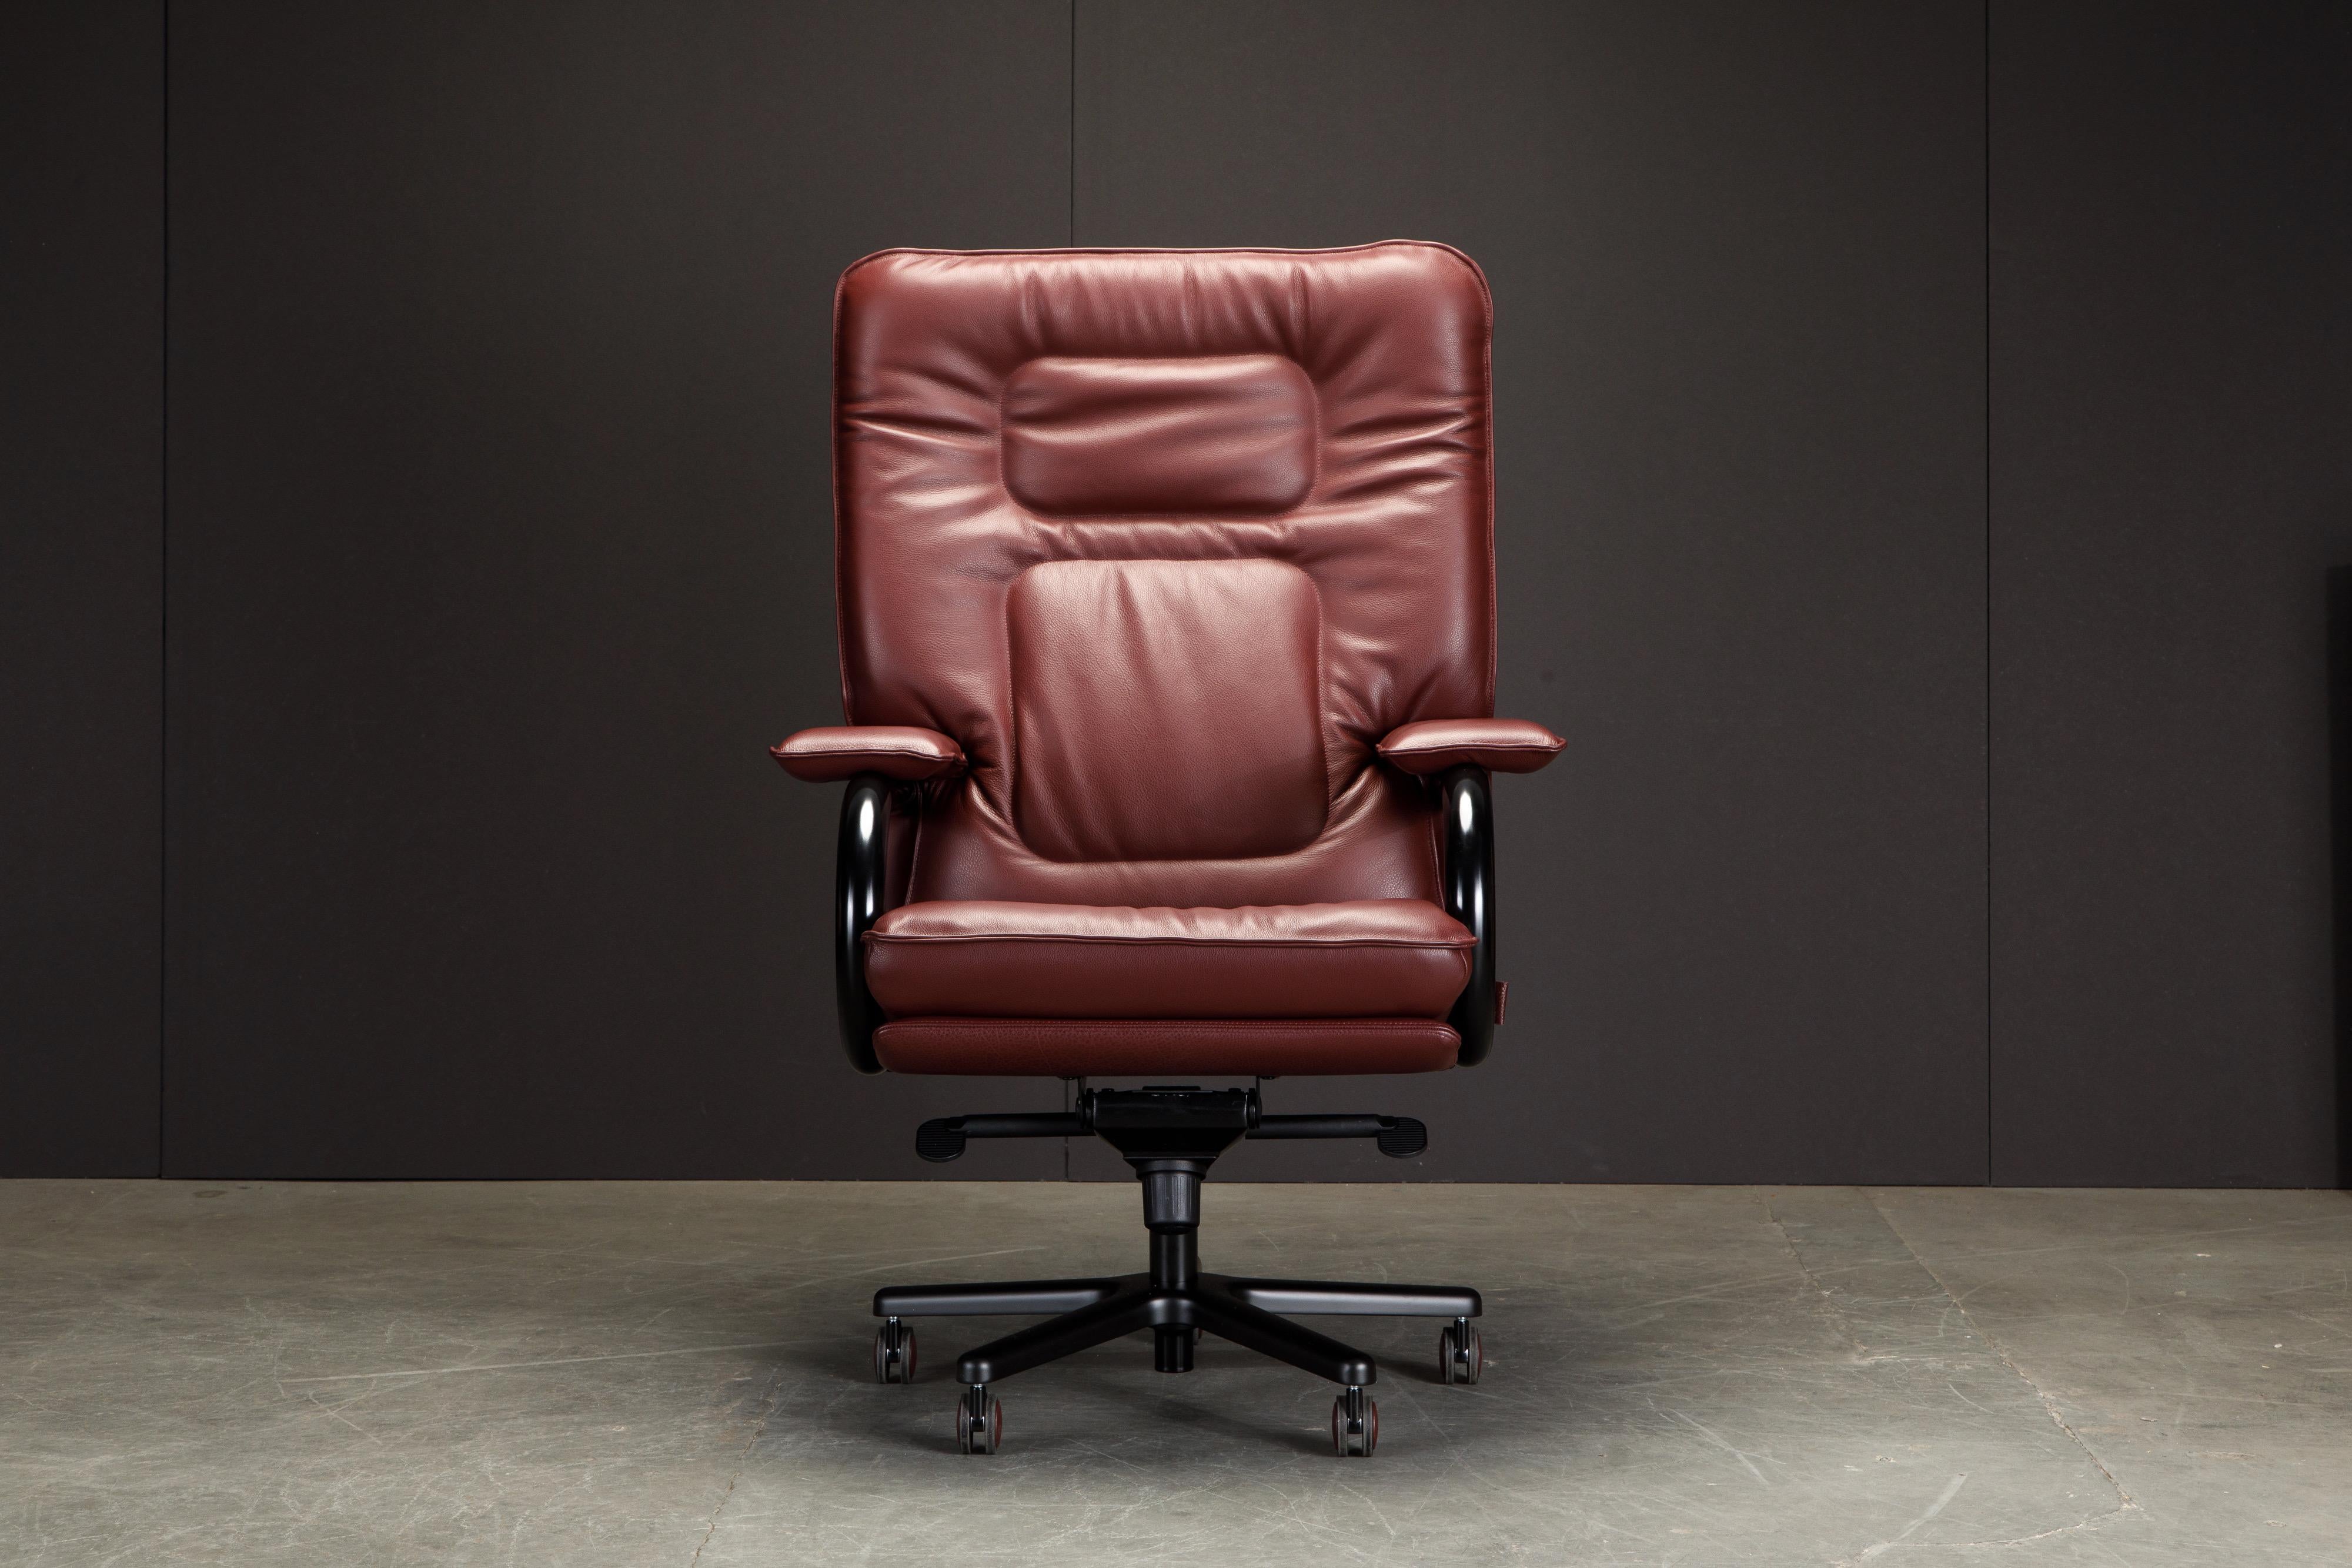 This incredible Post-Modern executives chair is named 'Big', designed by Guido Faleschini by i4 Mariani originally designed in the 1970s, this example newly produced in gorgeous plum colored leather with black arms and base. 

Such incredible